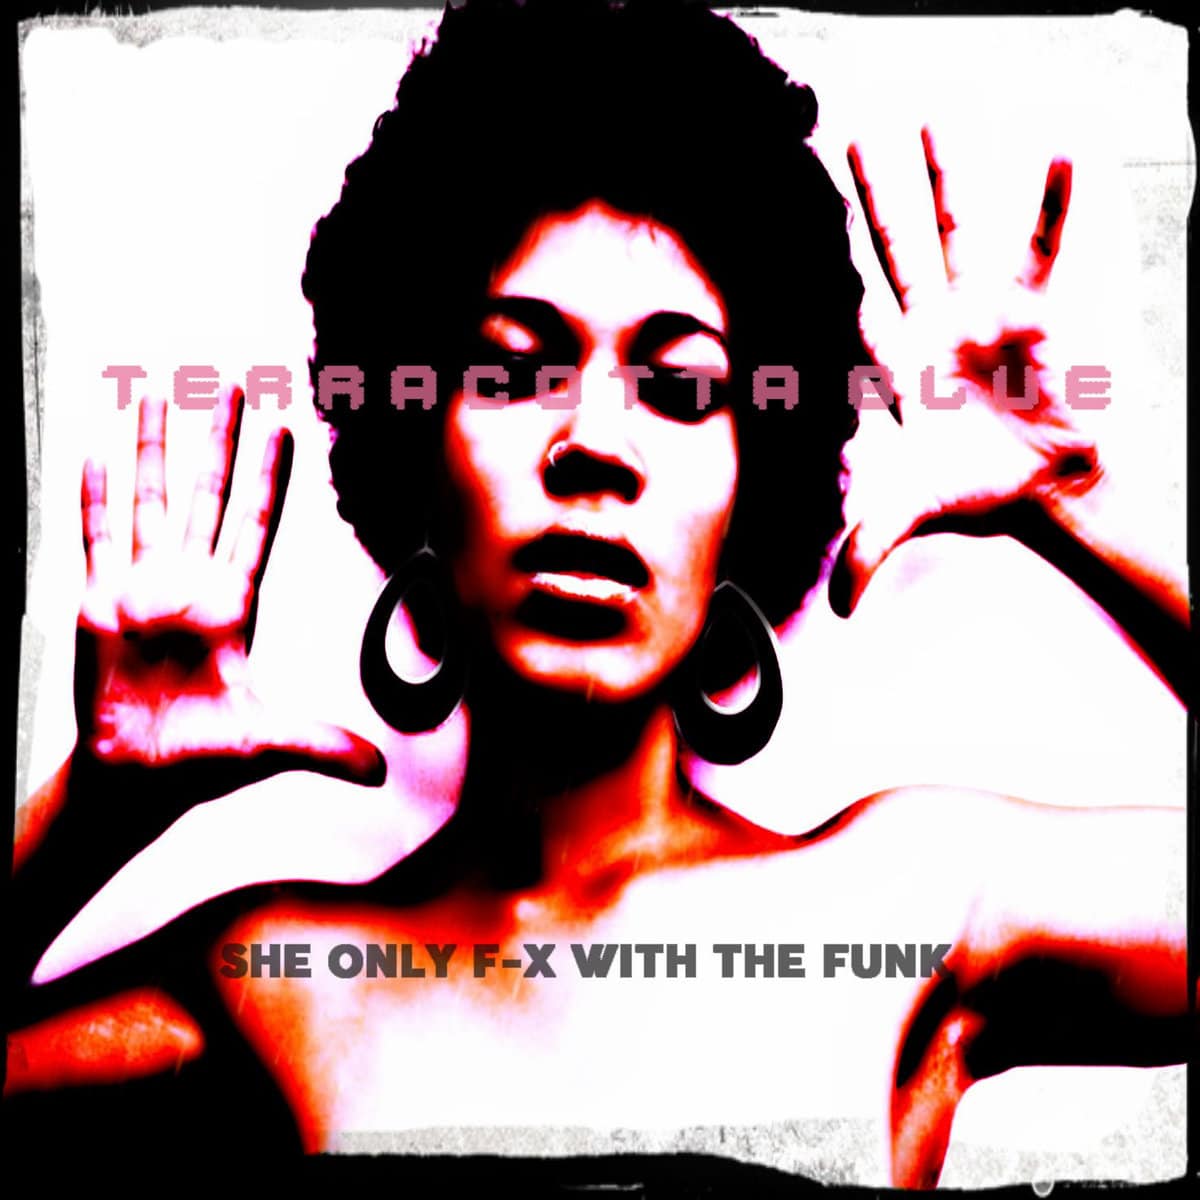 Terracotta Blue - "She Only F-x With The Funk" (Release)